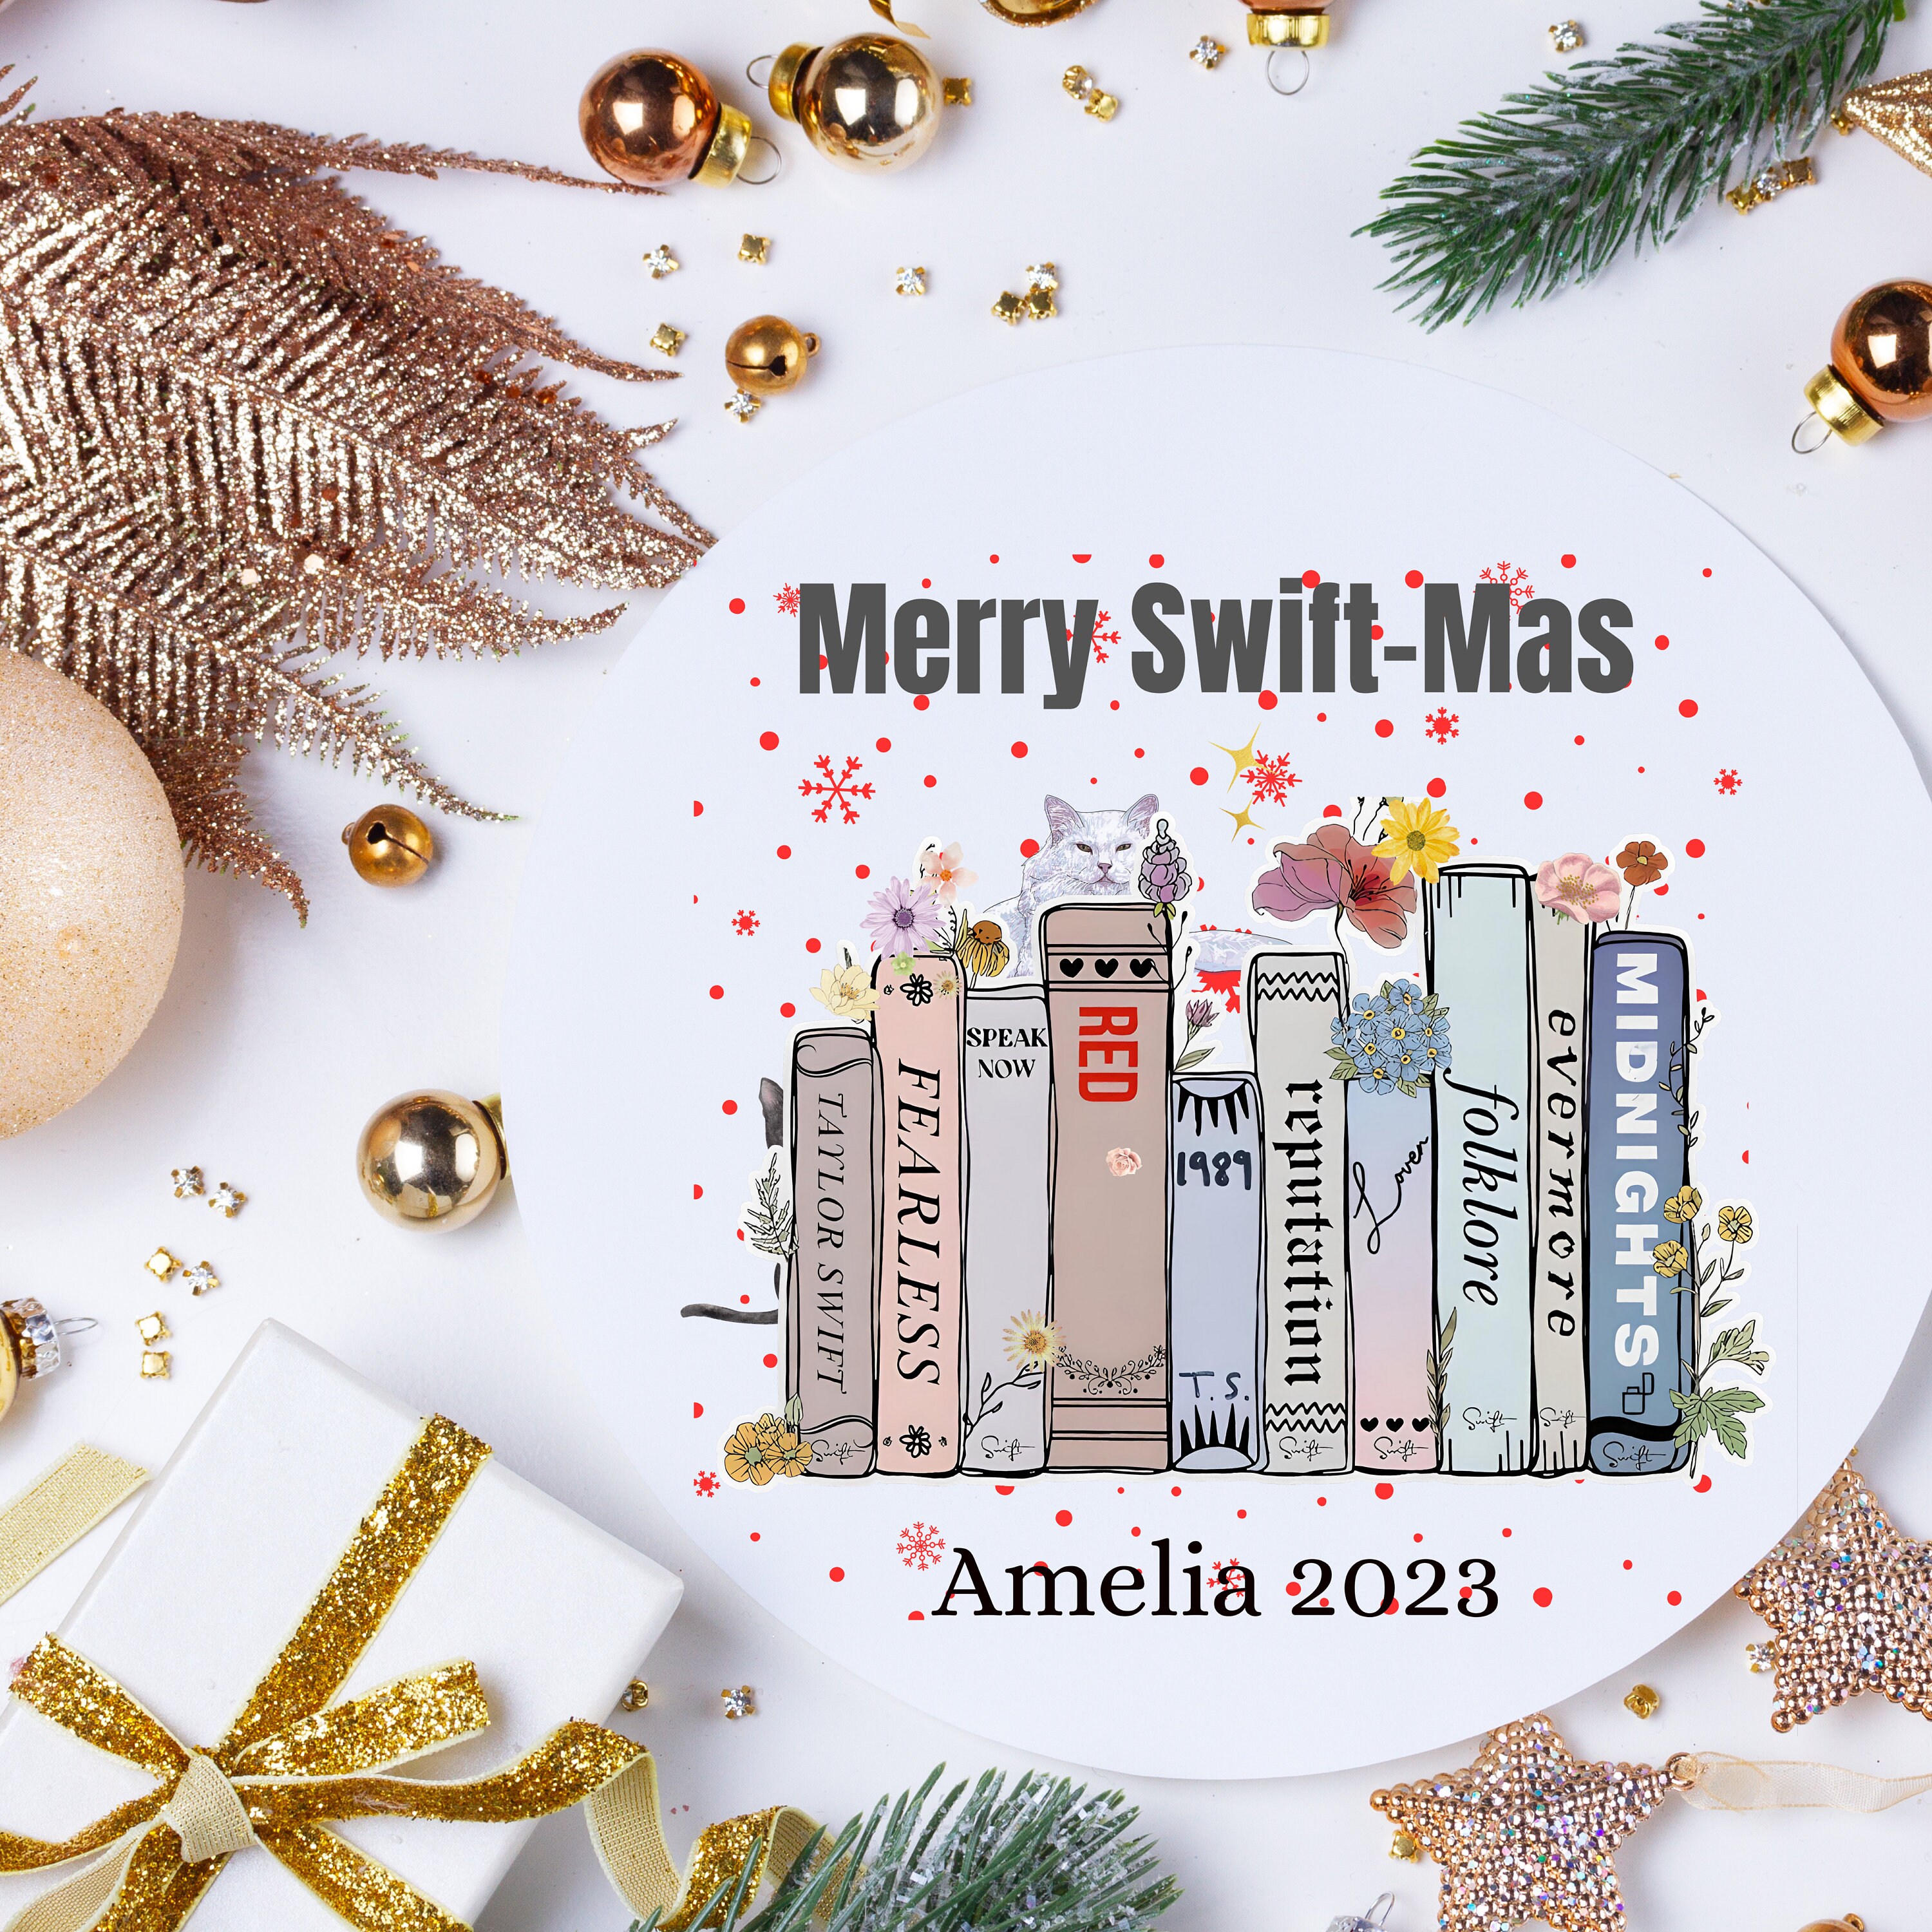 Discover Merry Swift mas Ornament, Christmas Tree decor for swif-tie fan pop idol! Personalize with name! Great christmas gift for her, Secret santa